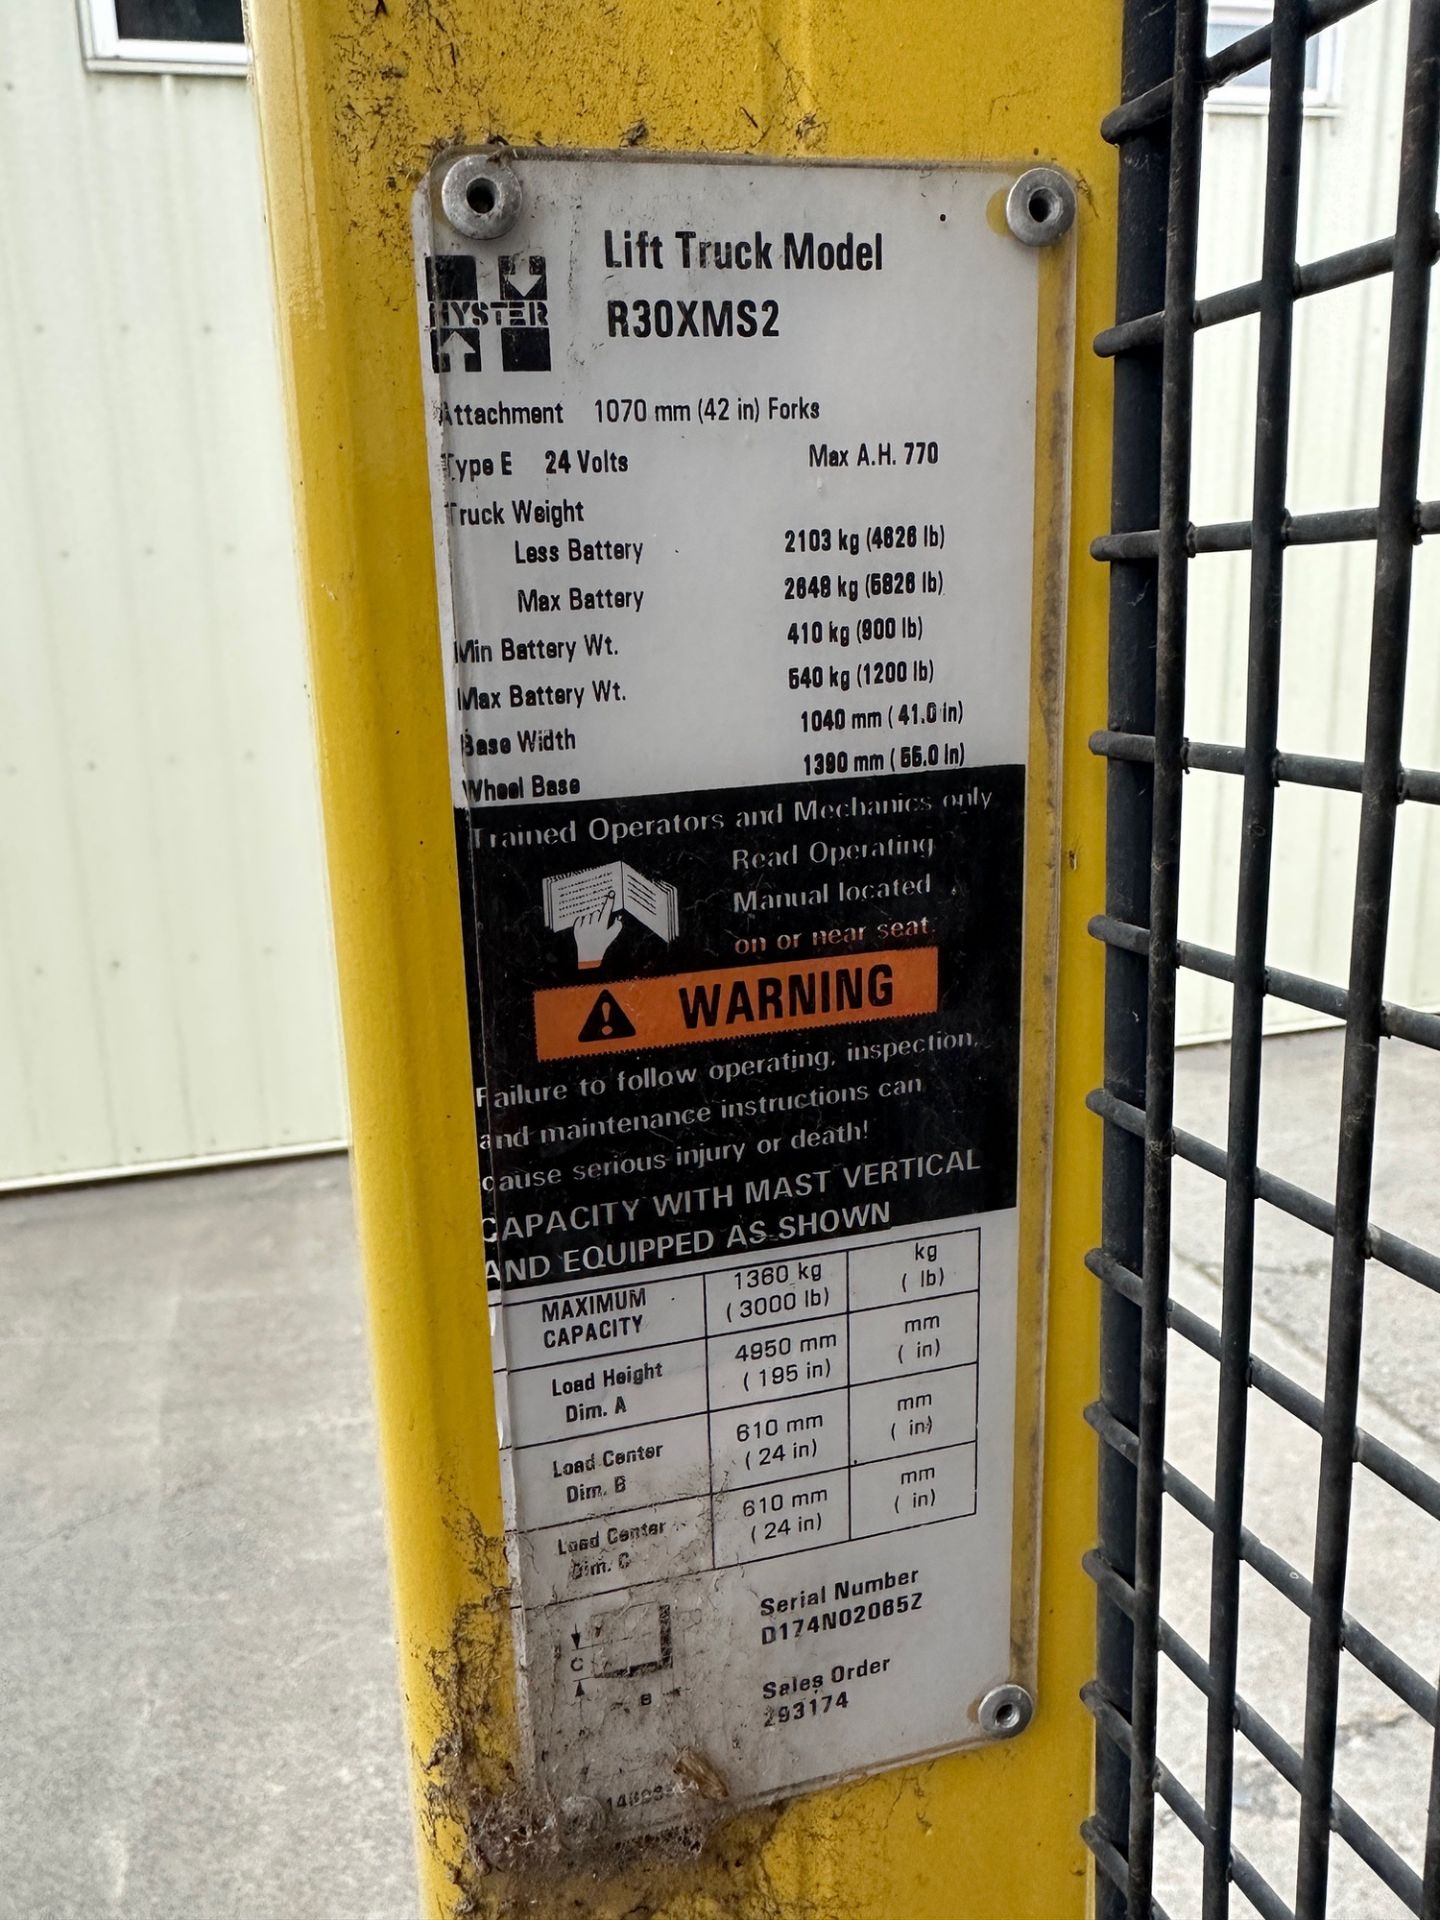 Hyster 24 Volt Electric Lift Truck Model R30XMS2 | Rig Fee $50 - Image 5 of 5